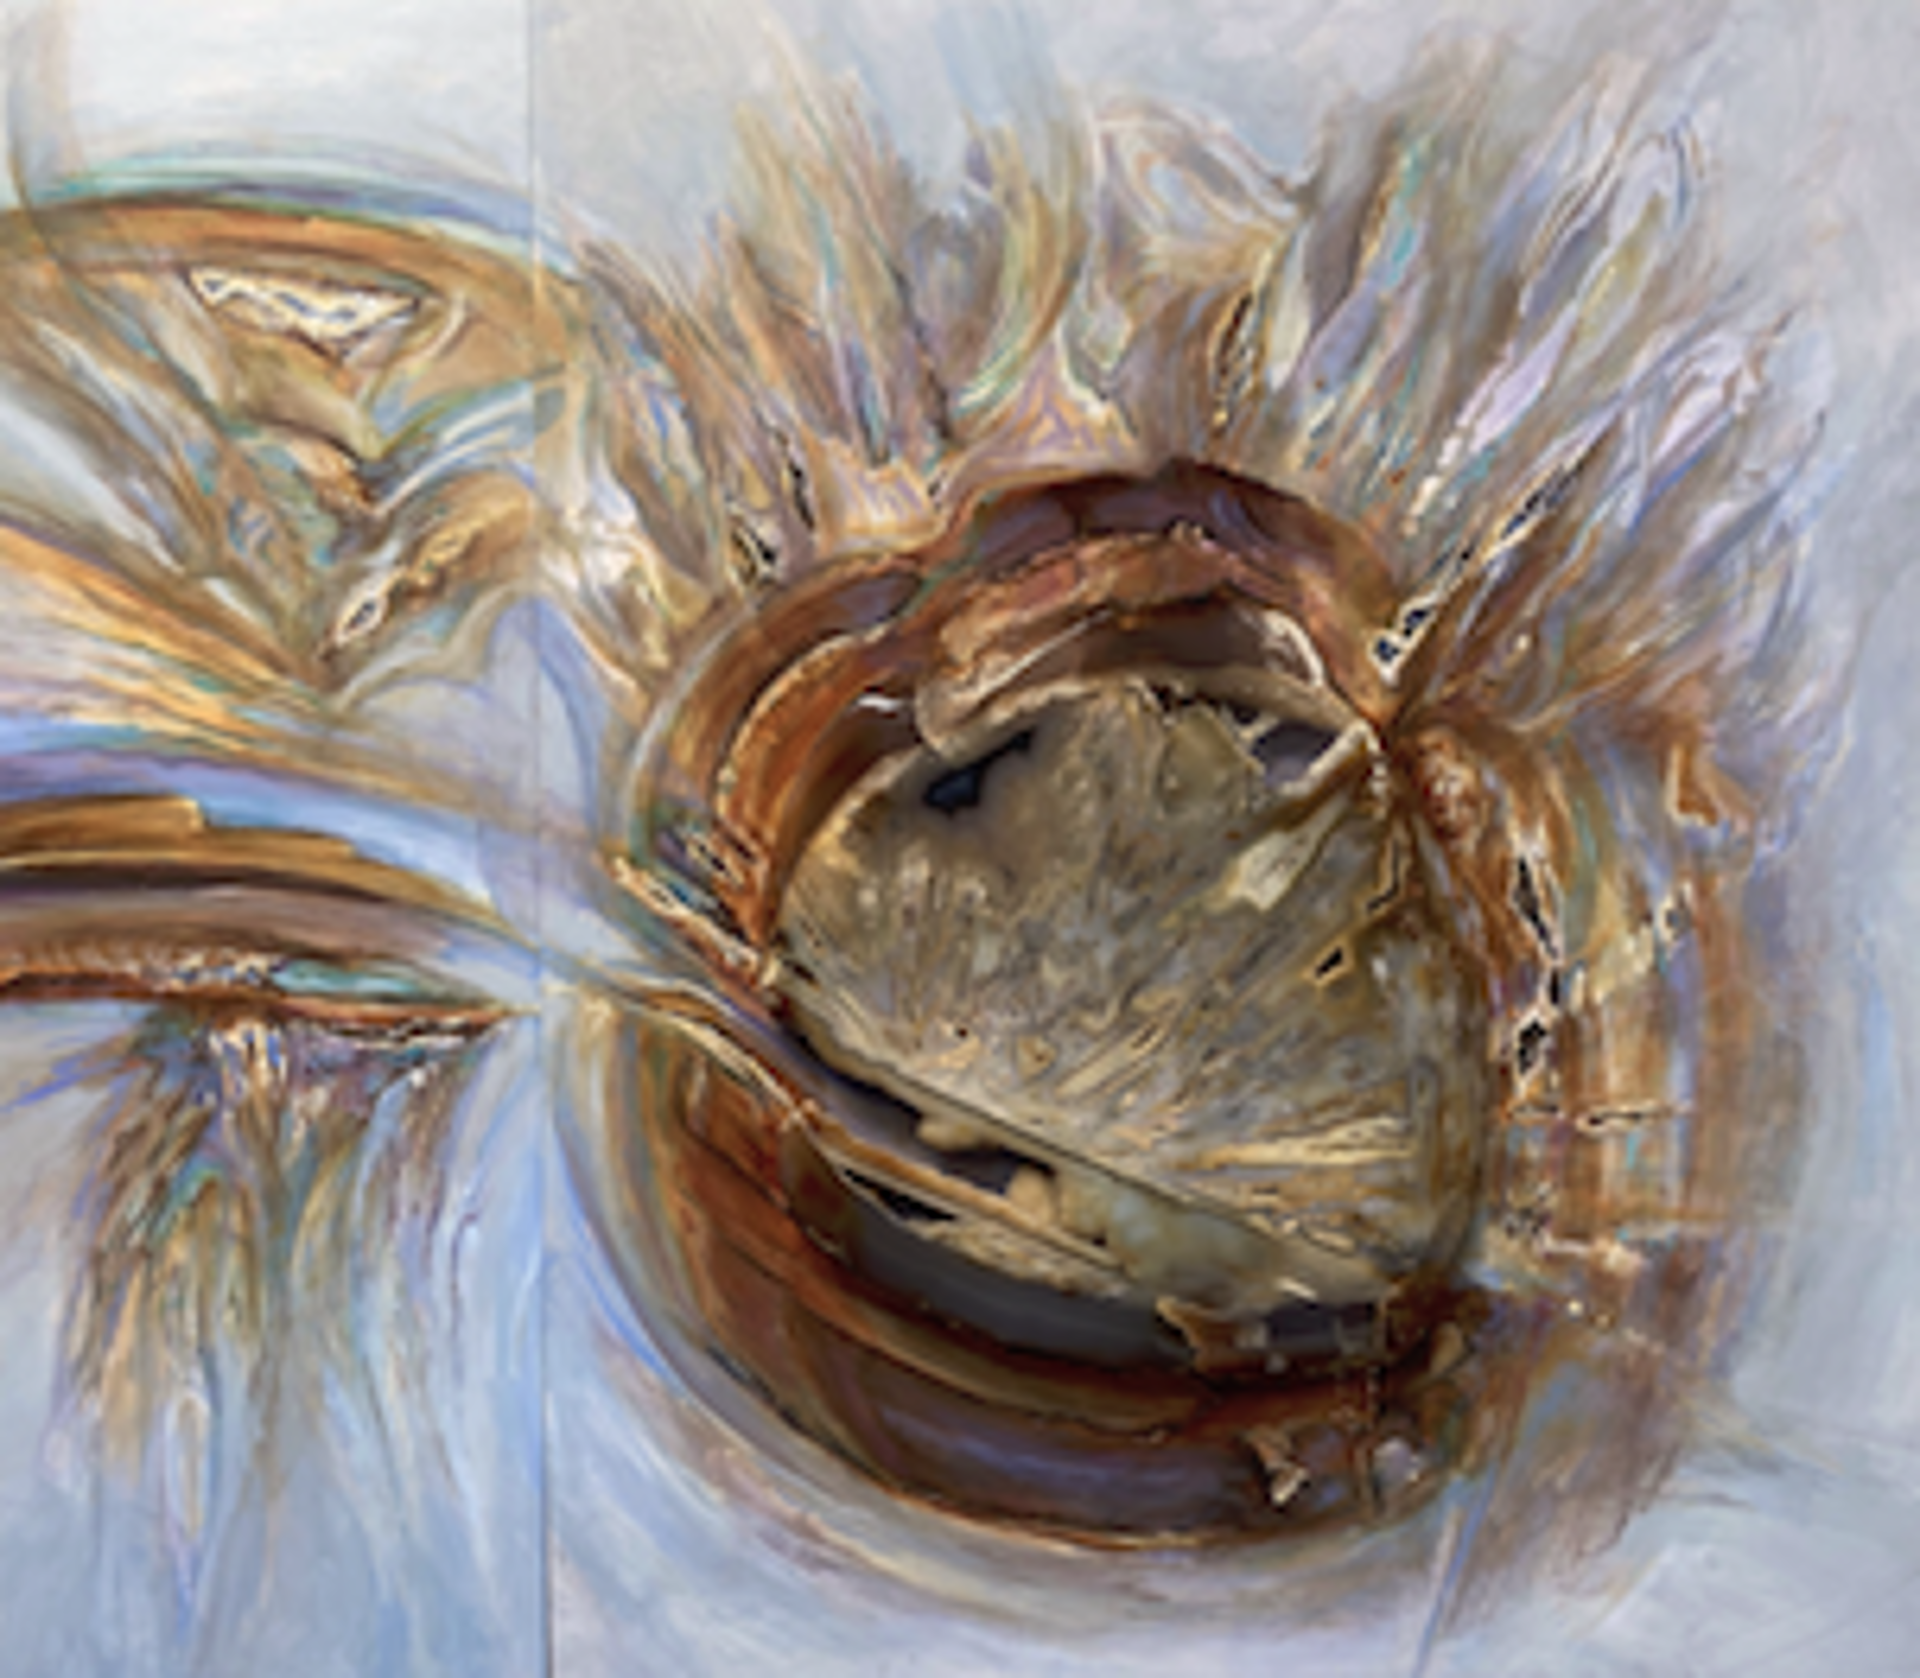 Morning has Broken (Diptych Agate) by Redhawk Mallet